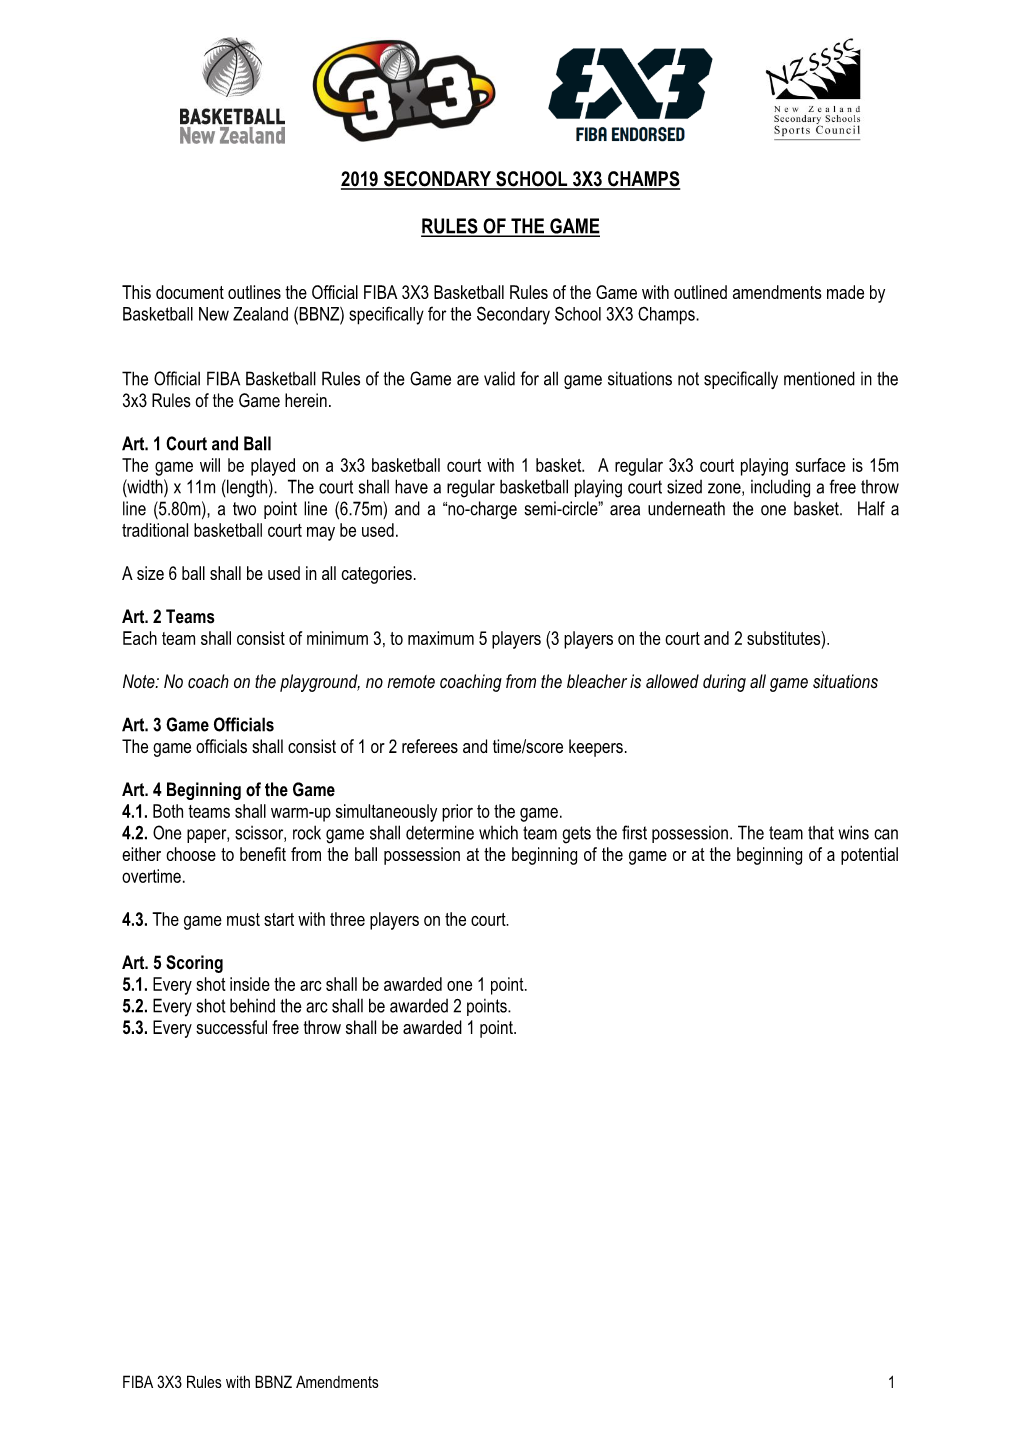 2019 Secondary School 3X3 Champs Rules of the Game